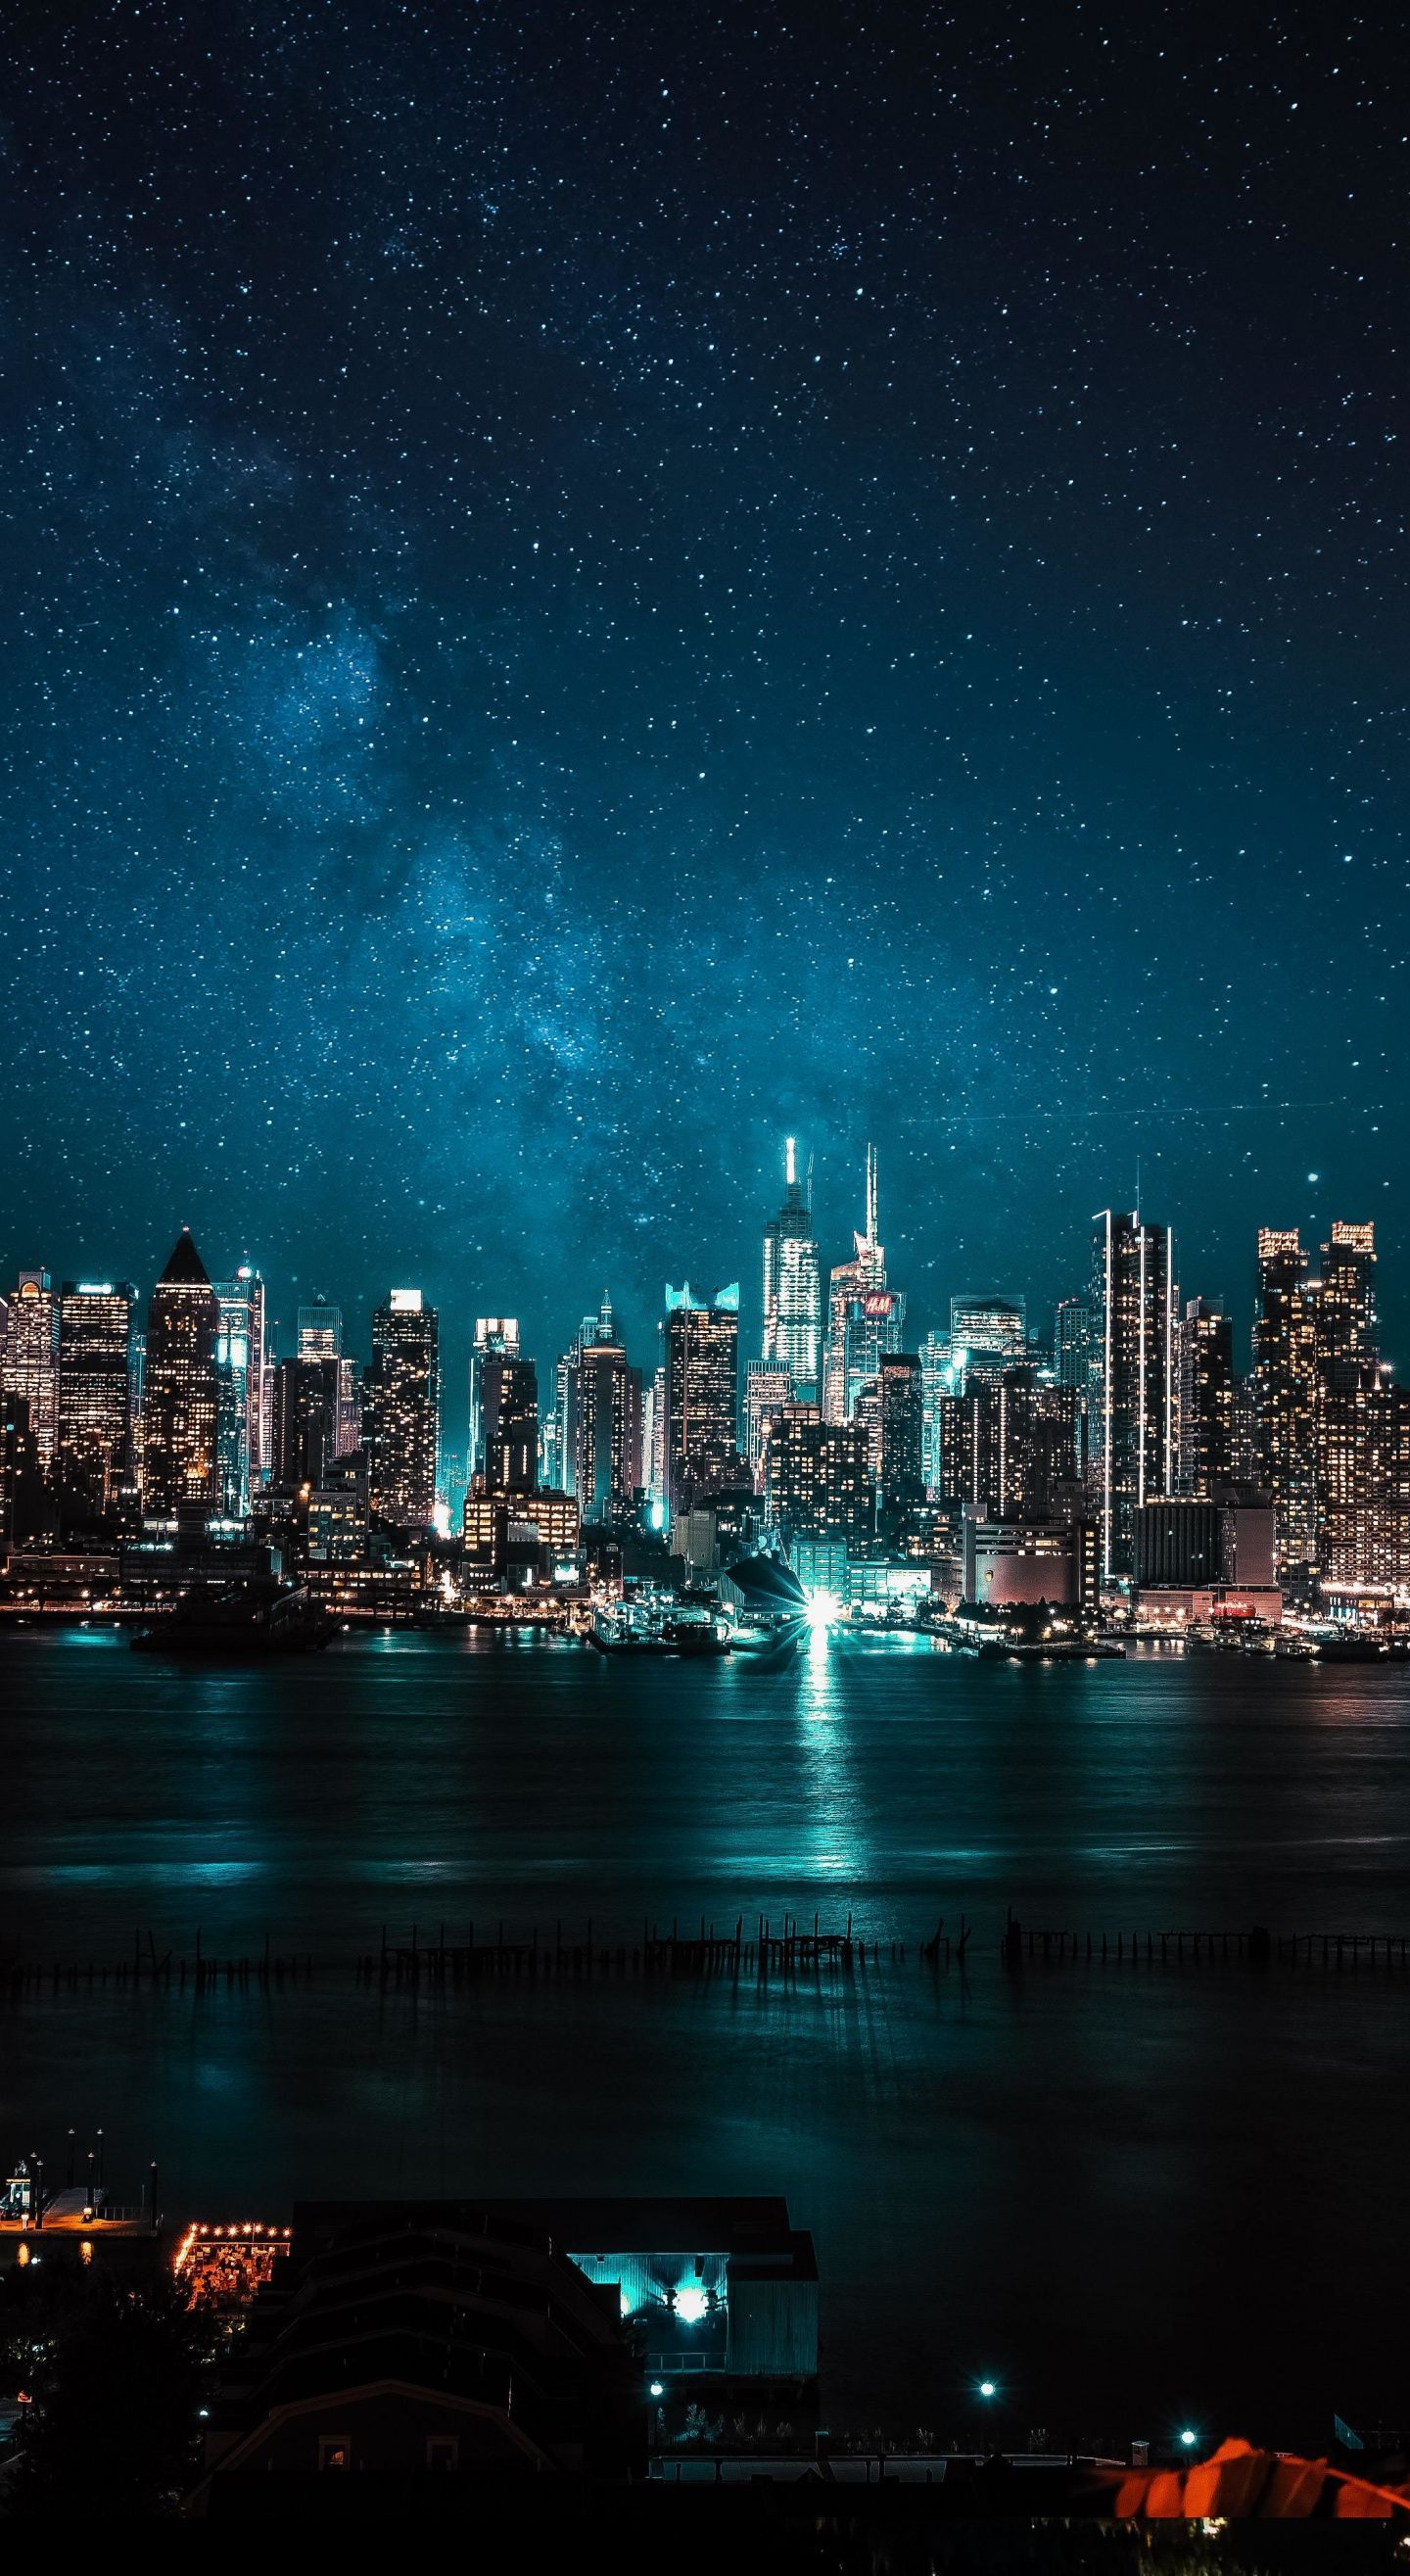 A city skyline at night with the milky way in it - Cityscape, skyline